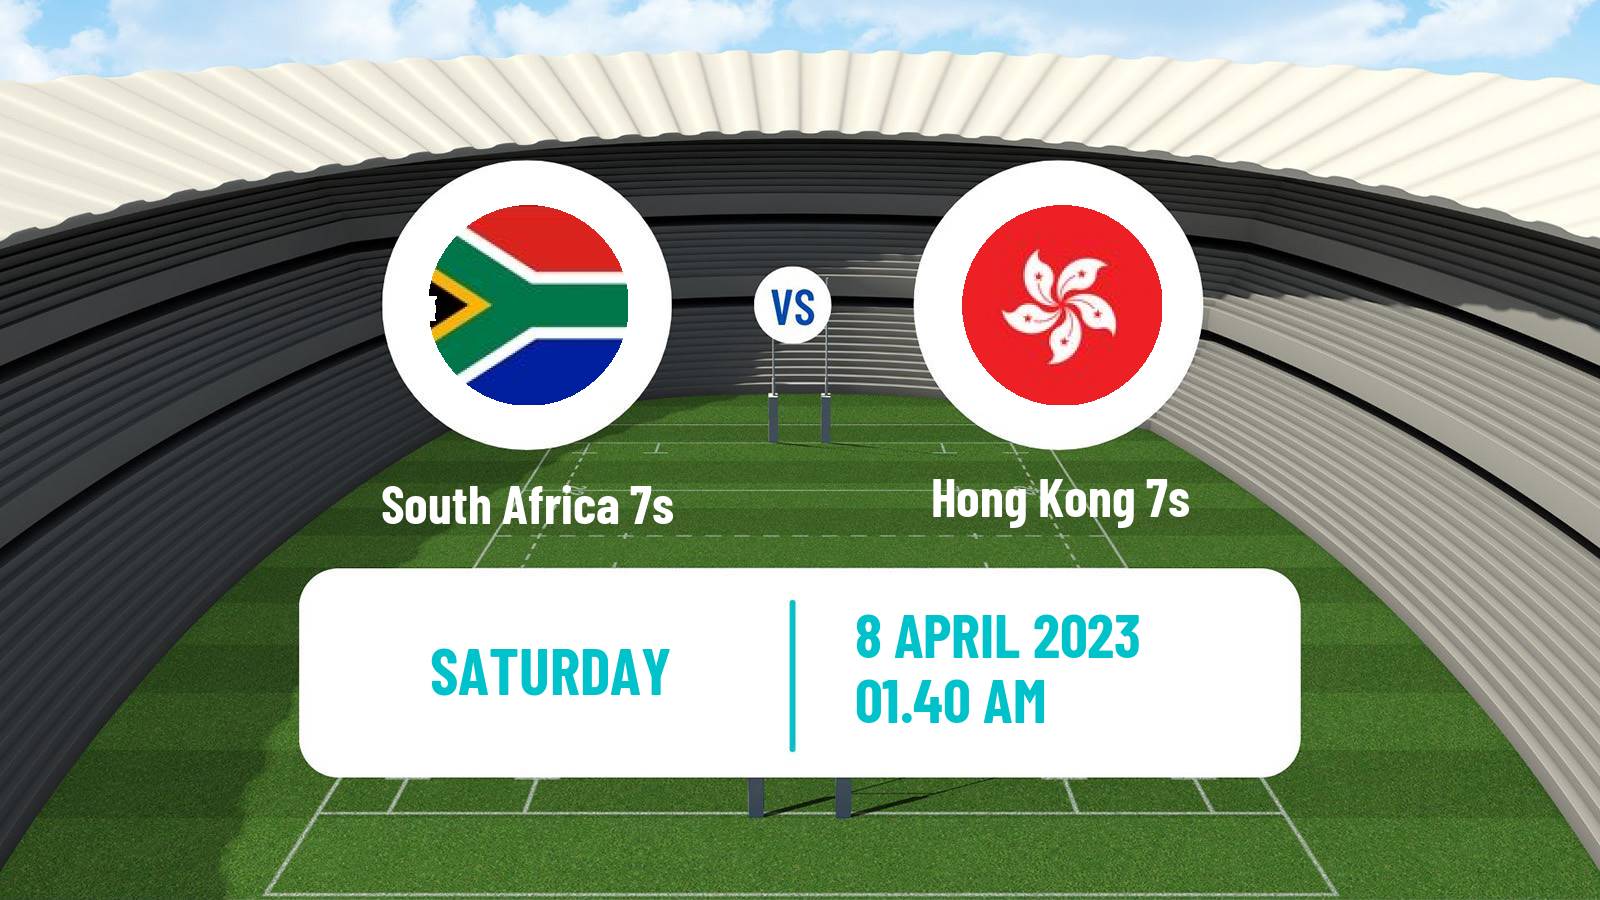 Rugby union Sevens World Series - Singapore South Africa 7s - Hong Kong 7s